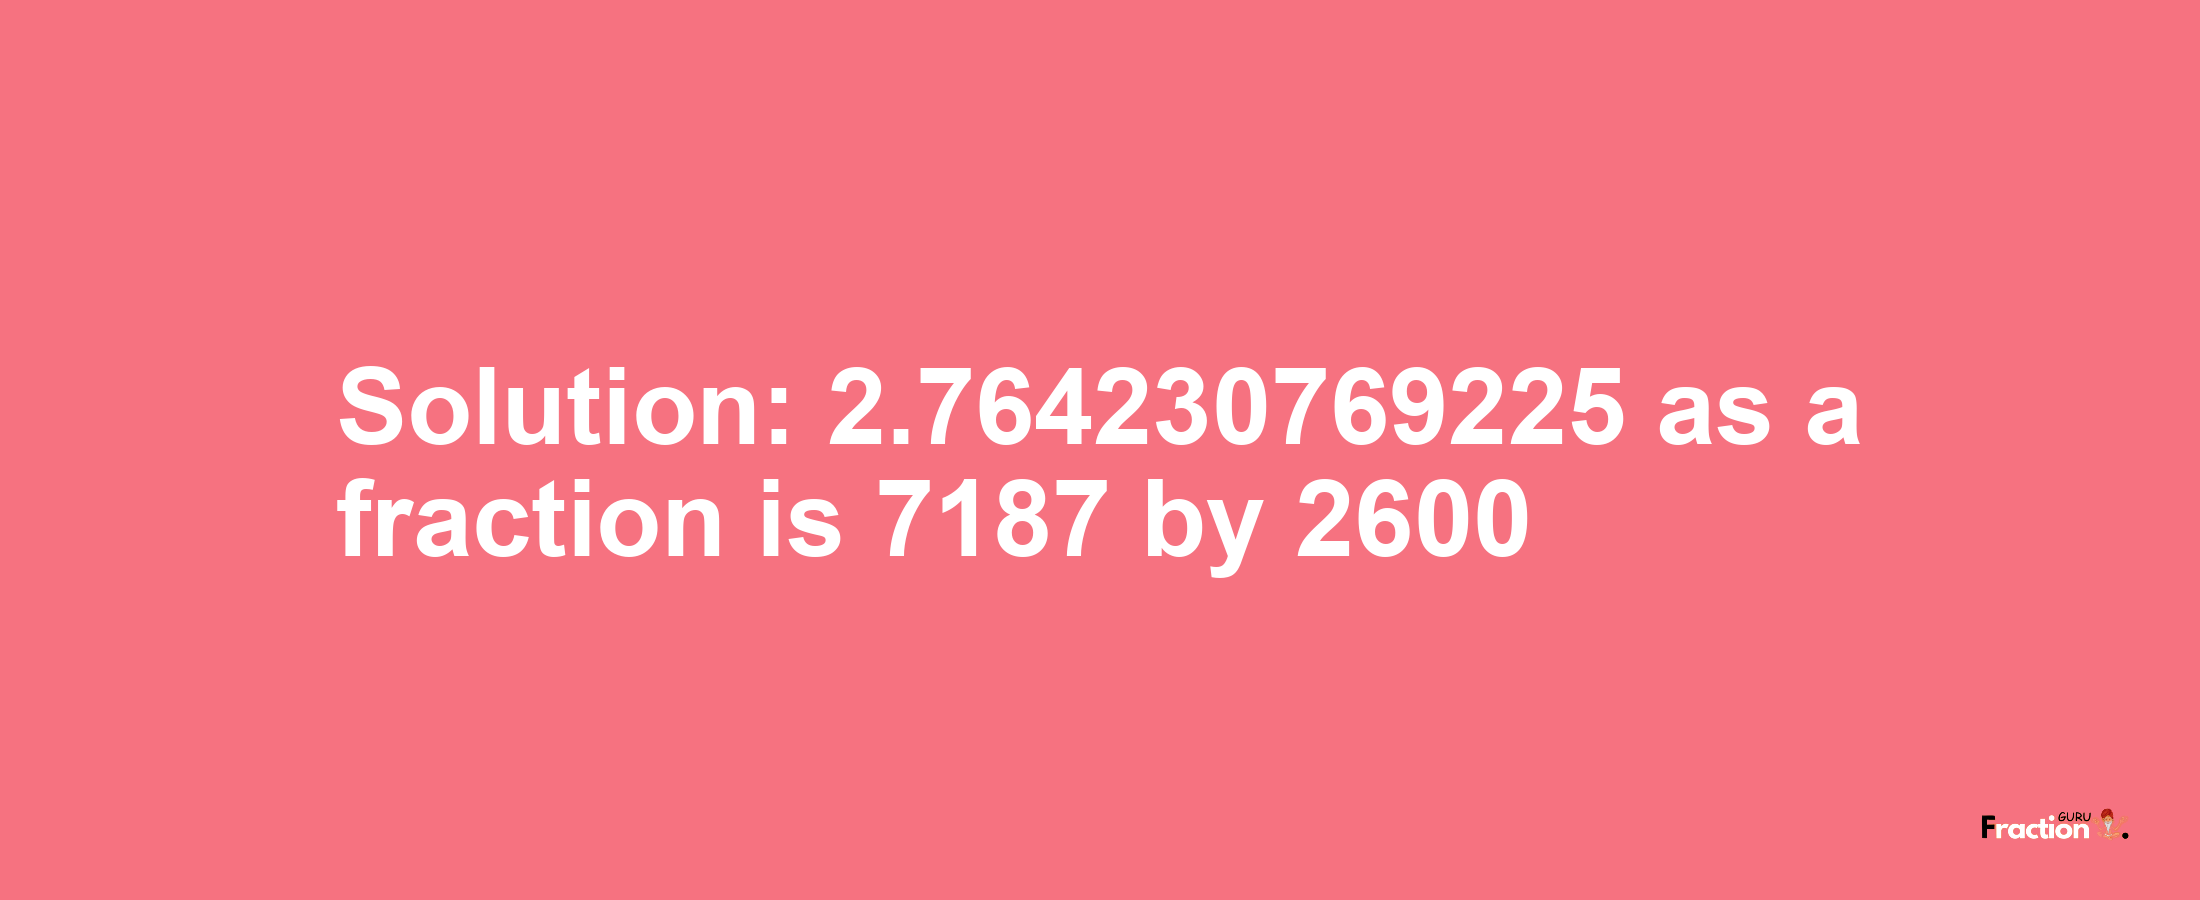 Solution:2.764230769225 as a fraction is 7187/2600